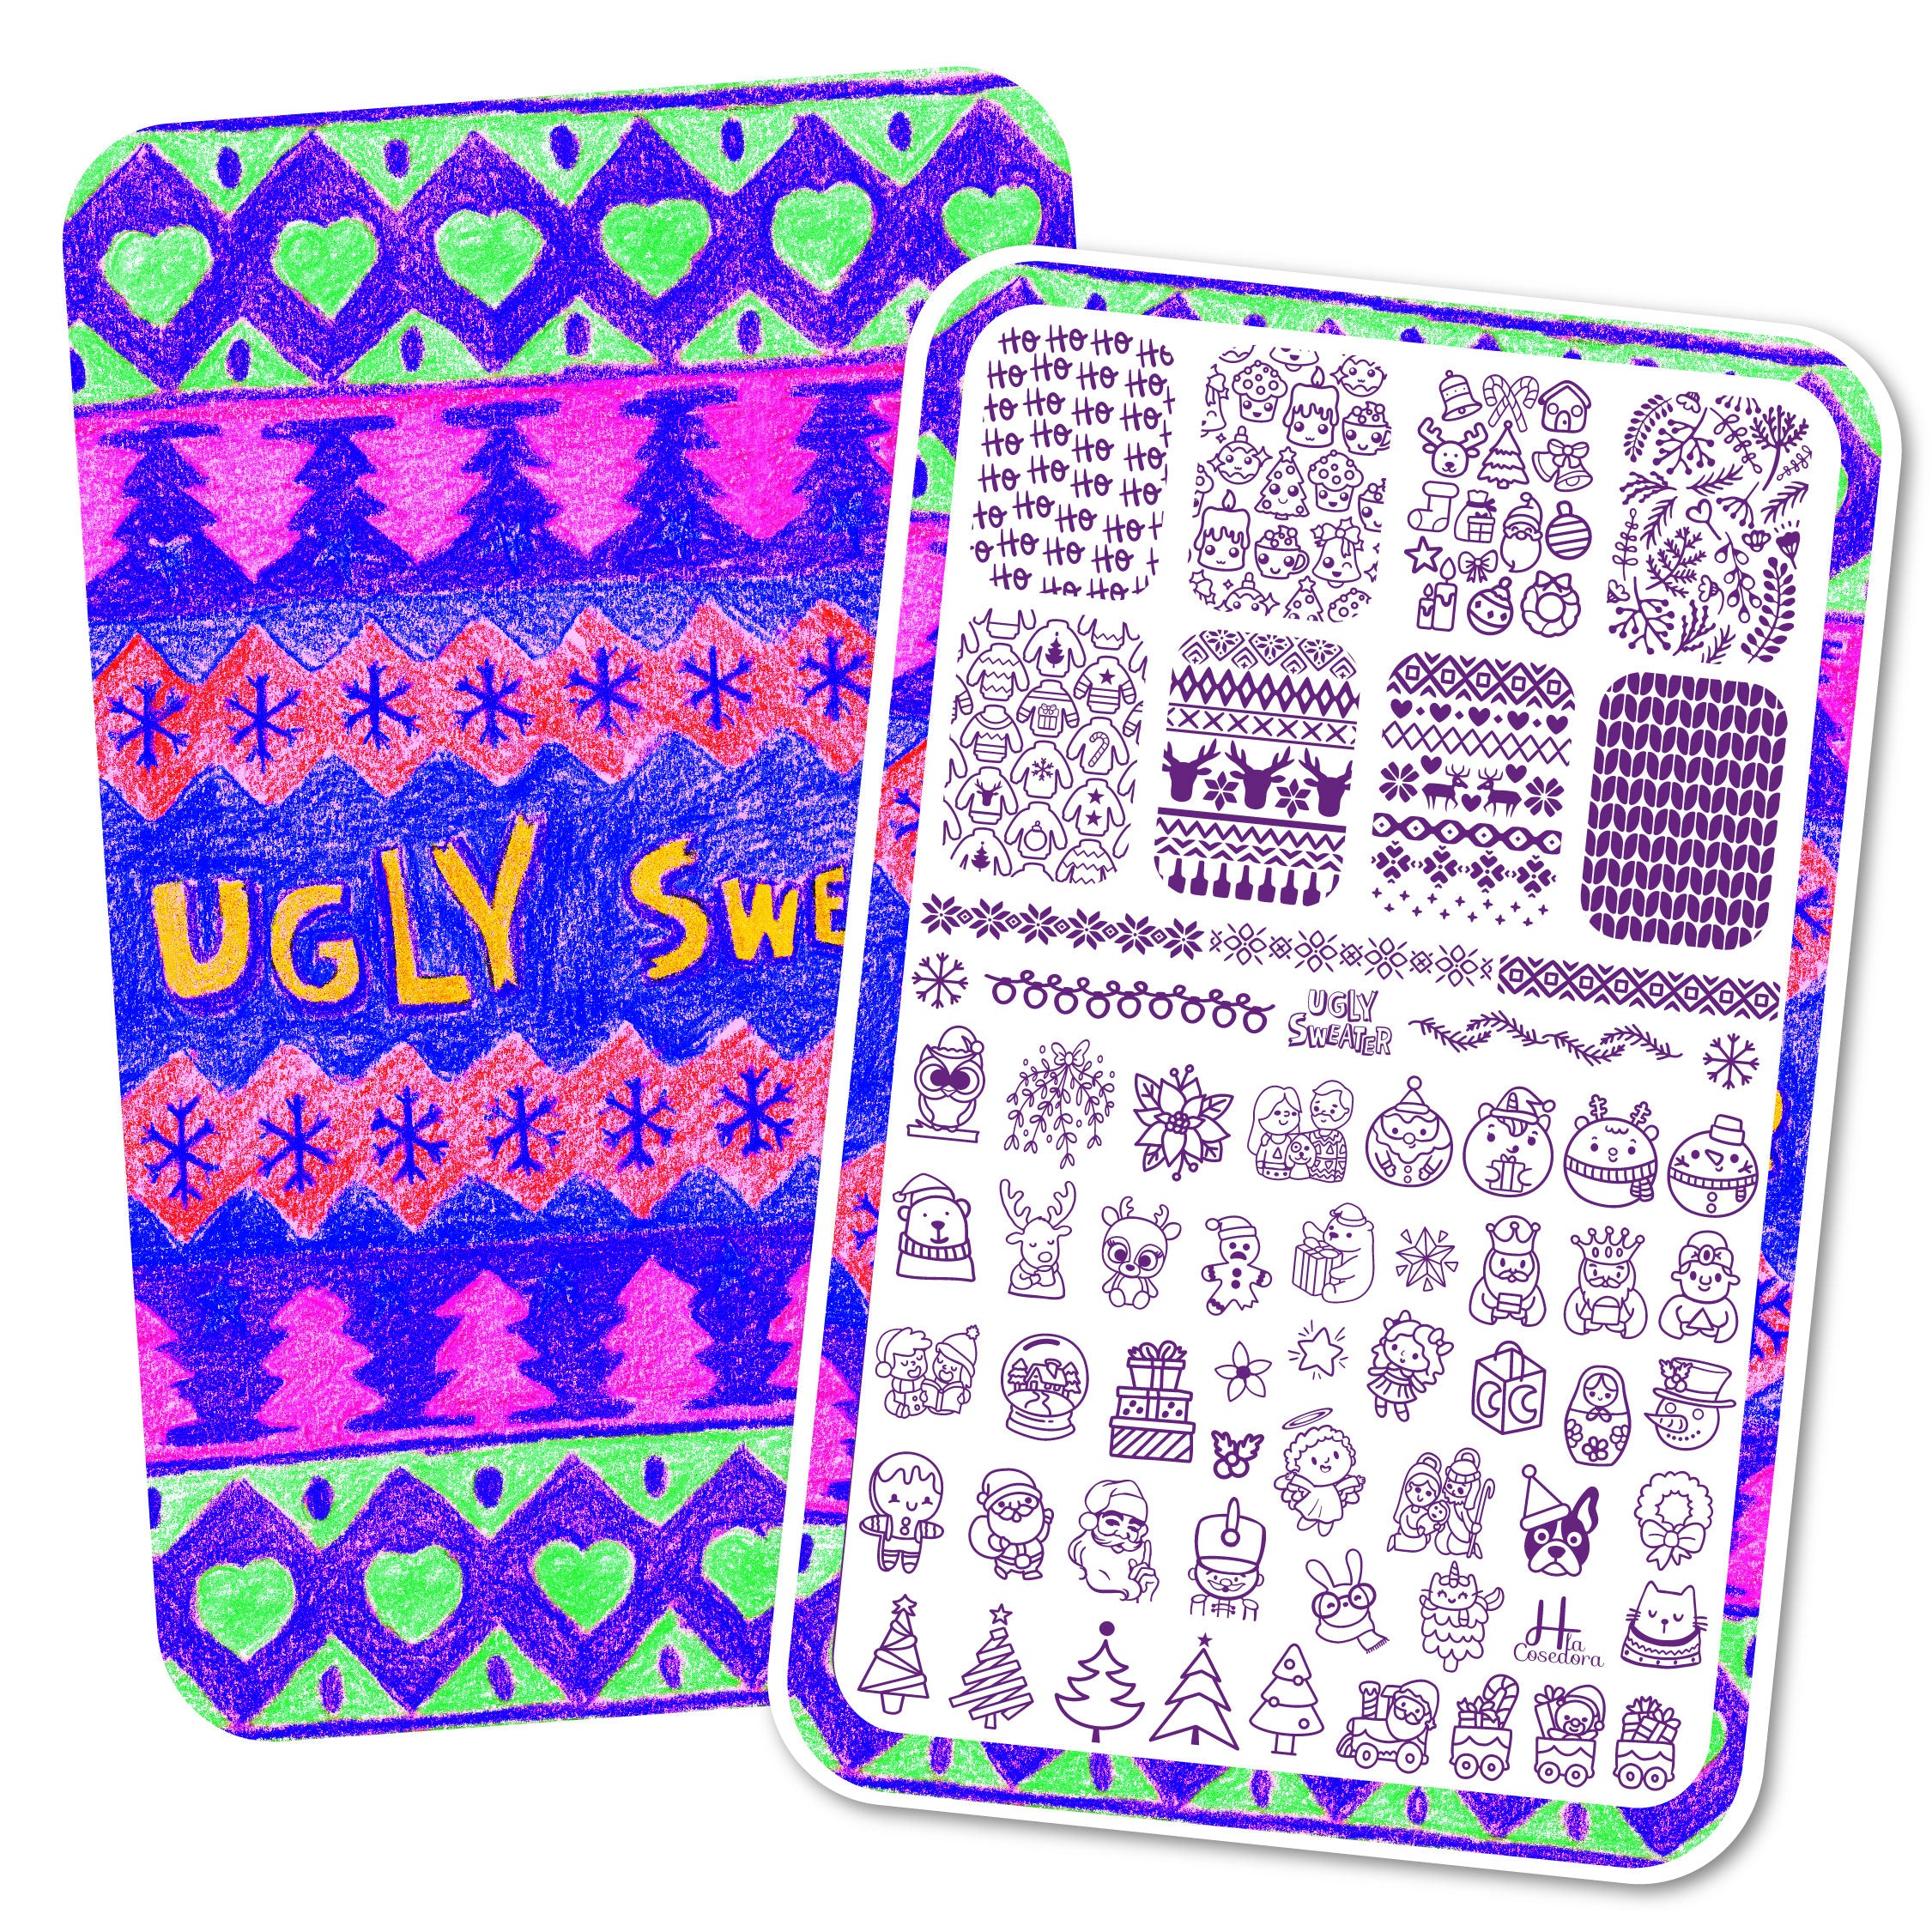 Ugly Sweater - hlacosedora - Placa Stamping - Esmalte Stamping - Kit Stamping - cuidado manos - cuidado uñas